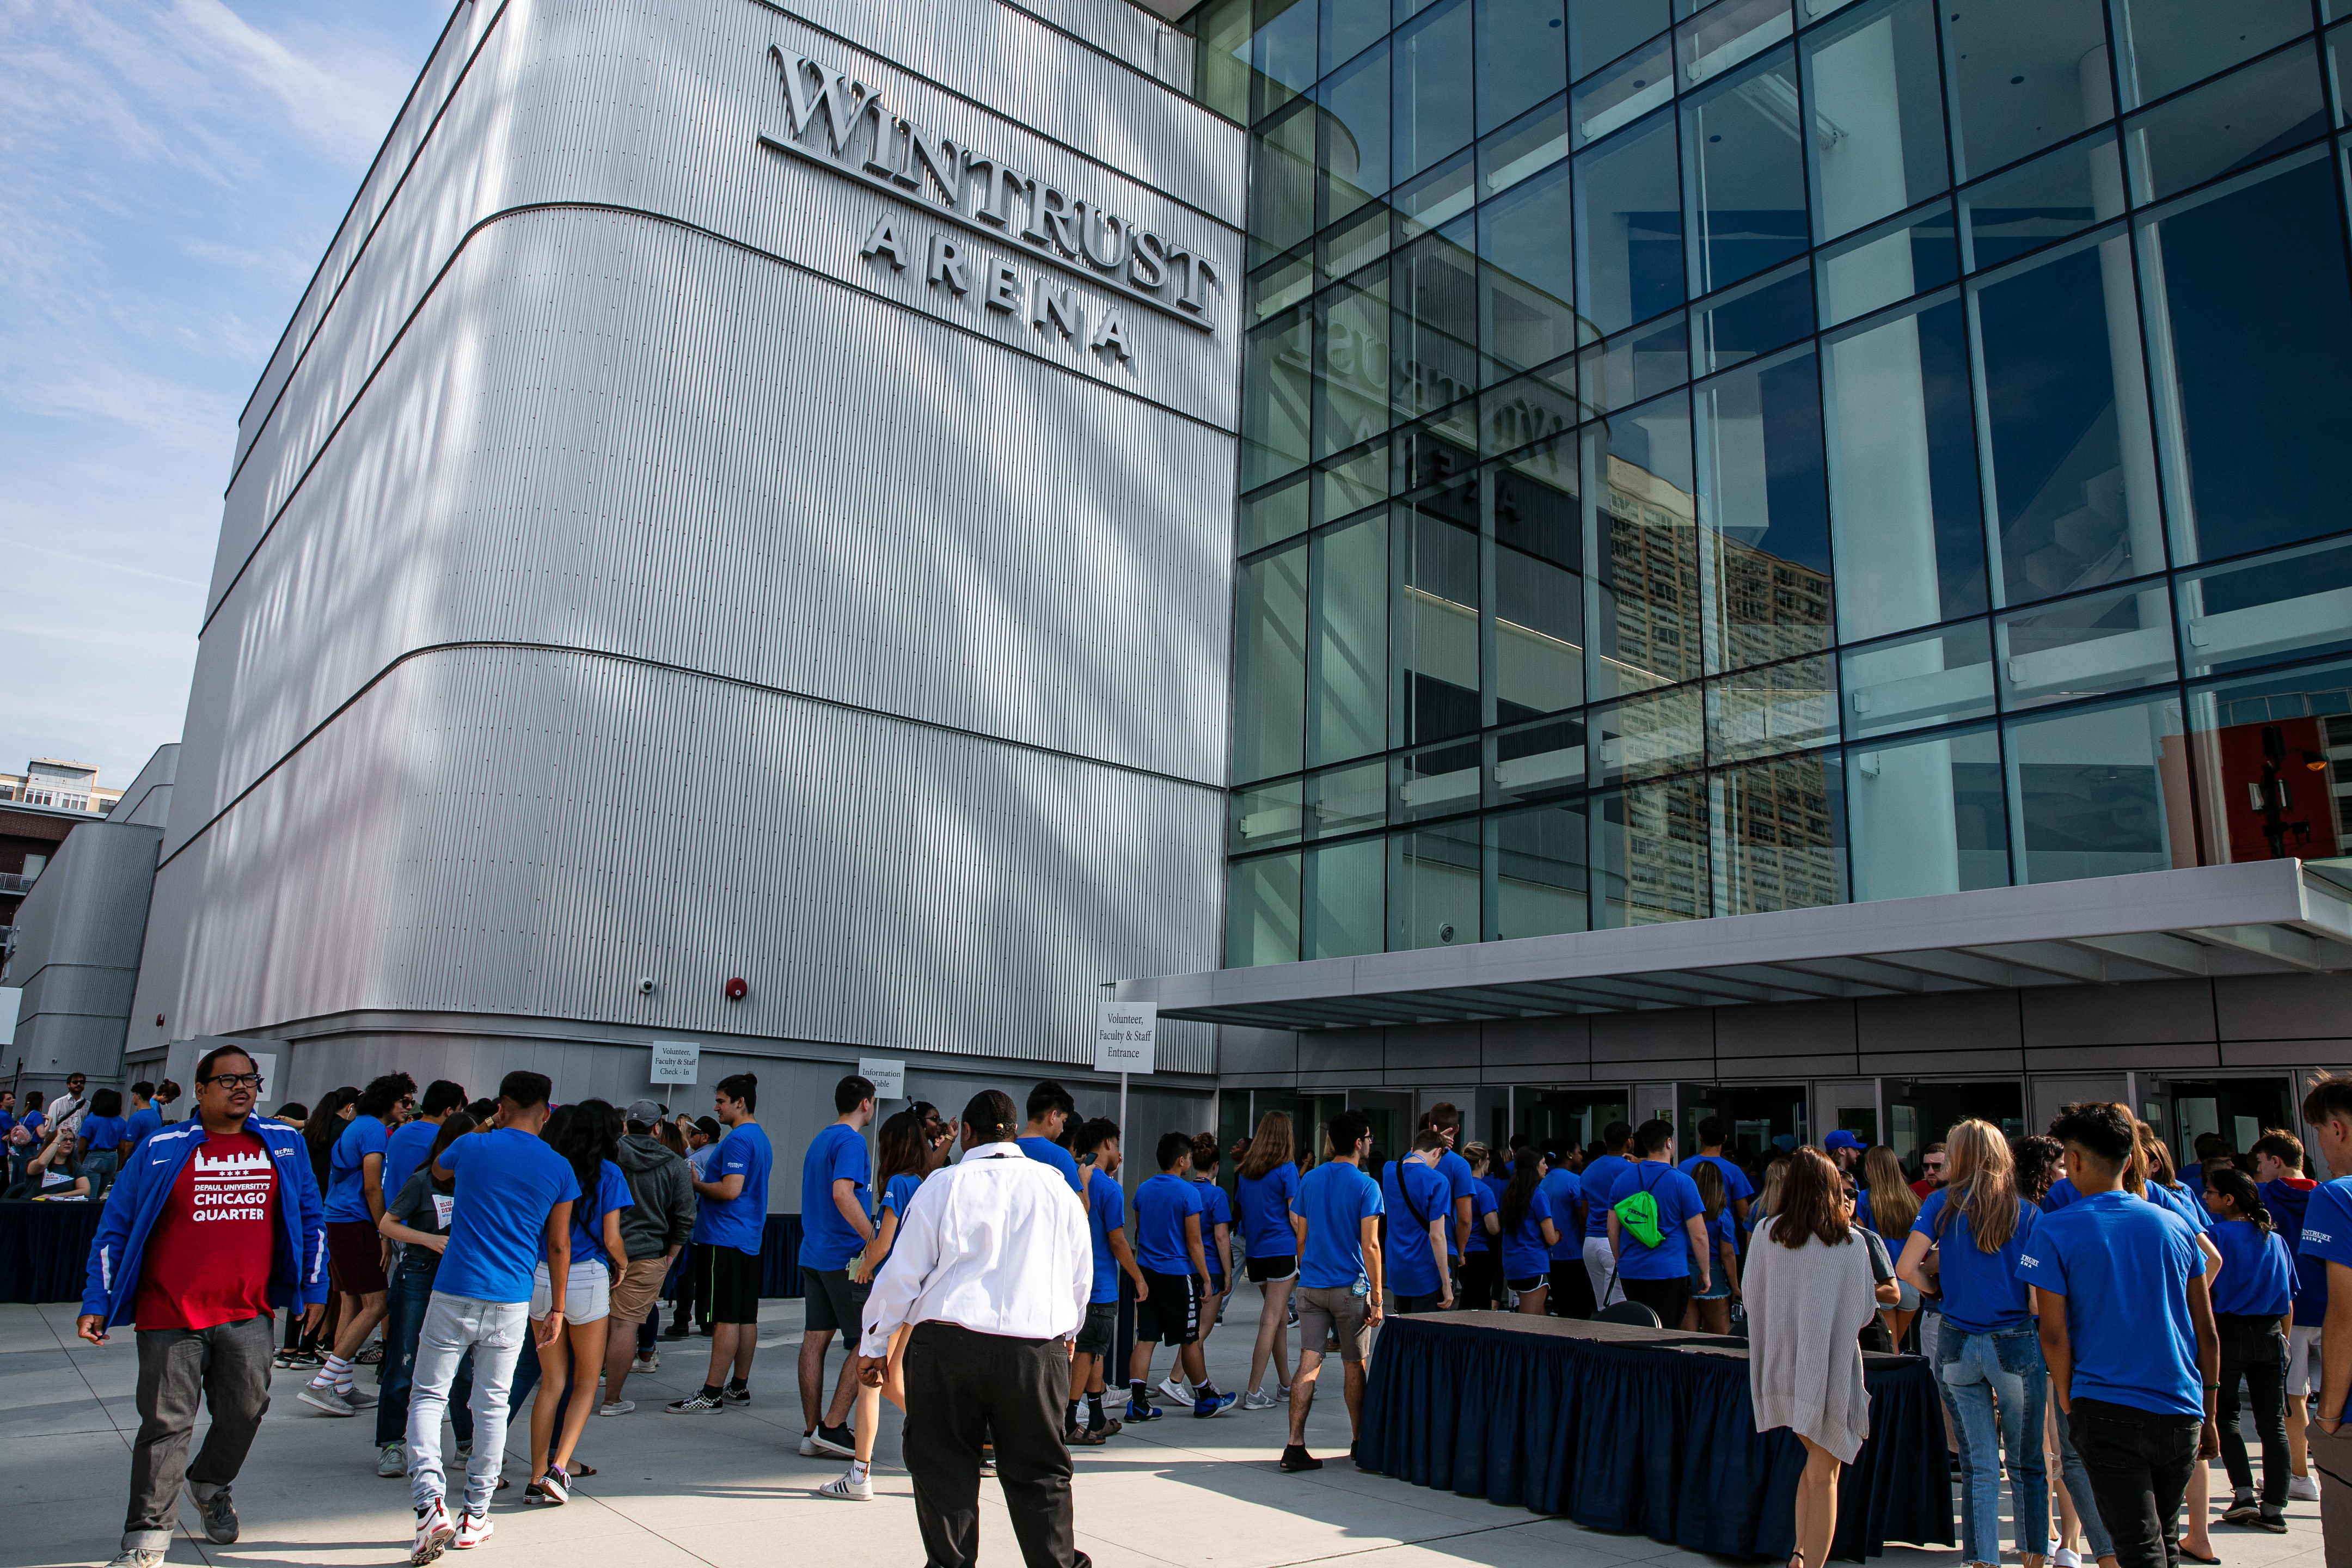 New DePaul students, faculty and staff in Discover and Explore Chicago classes, and faculty, staff and student volunteers file into Wintrust Arena for the new student convocation, Tuesday, Sept. 10th, 2019. (DePaul University/Randall Spriggs)